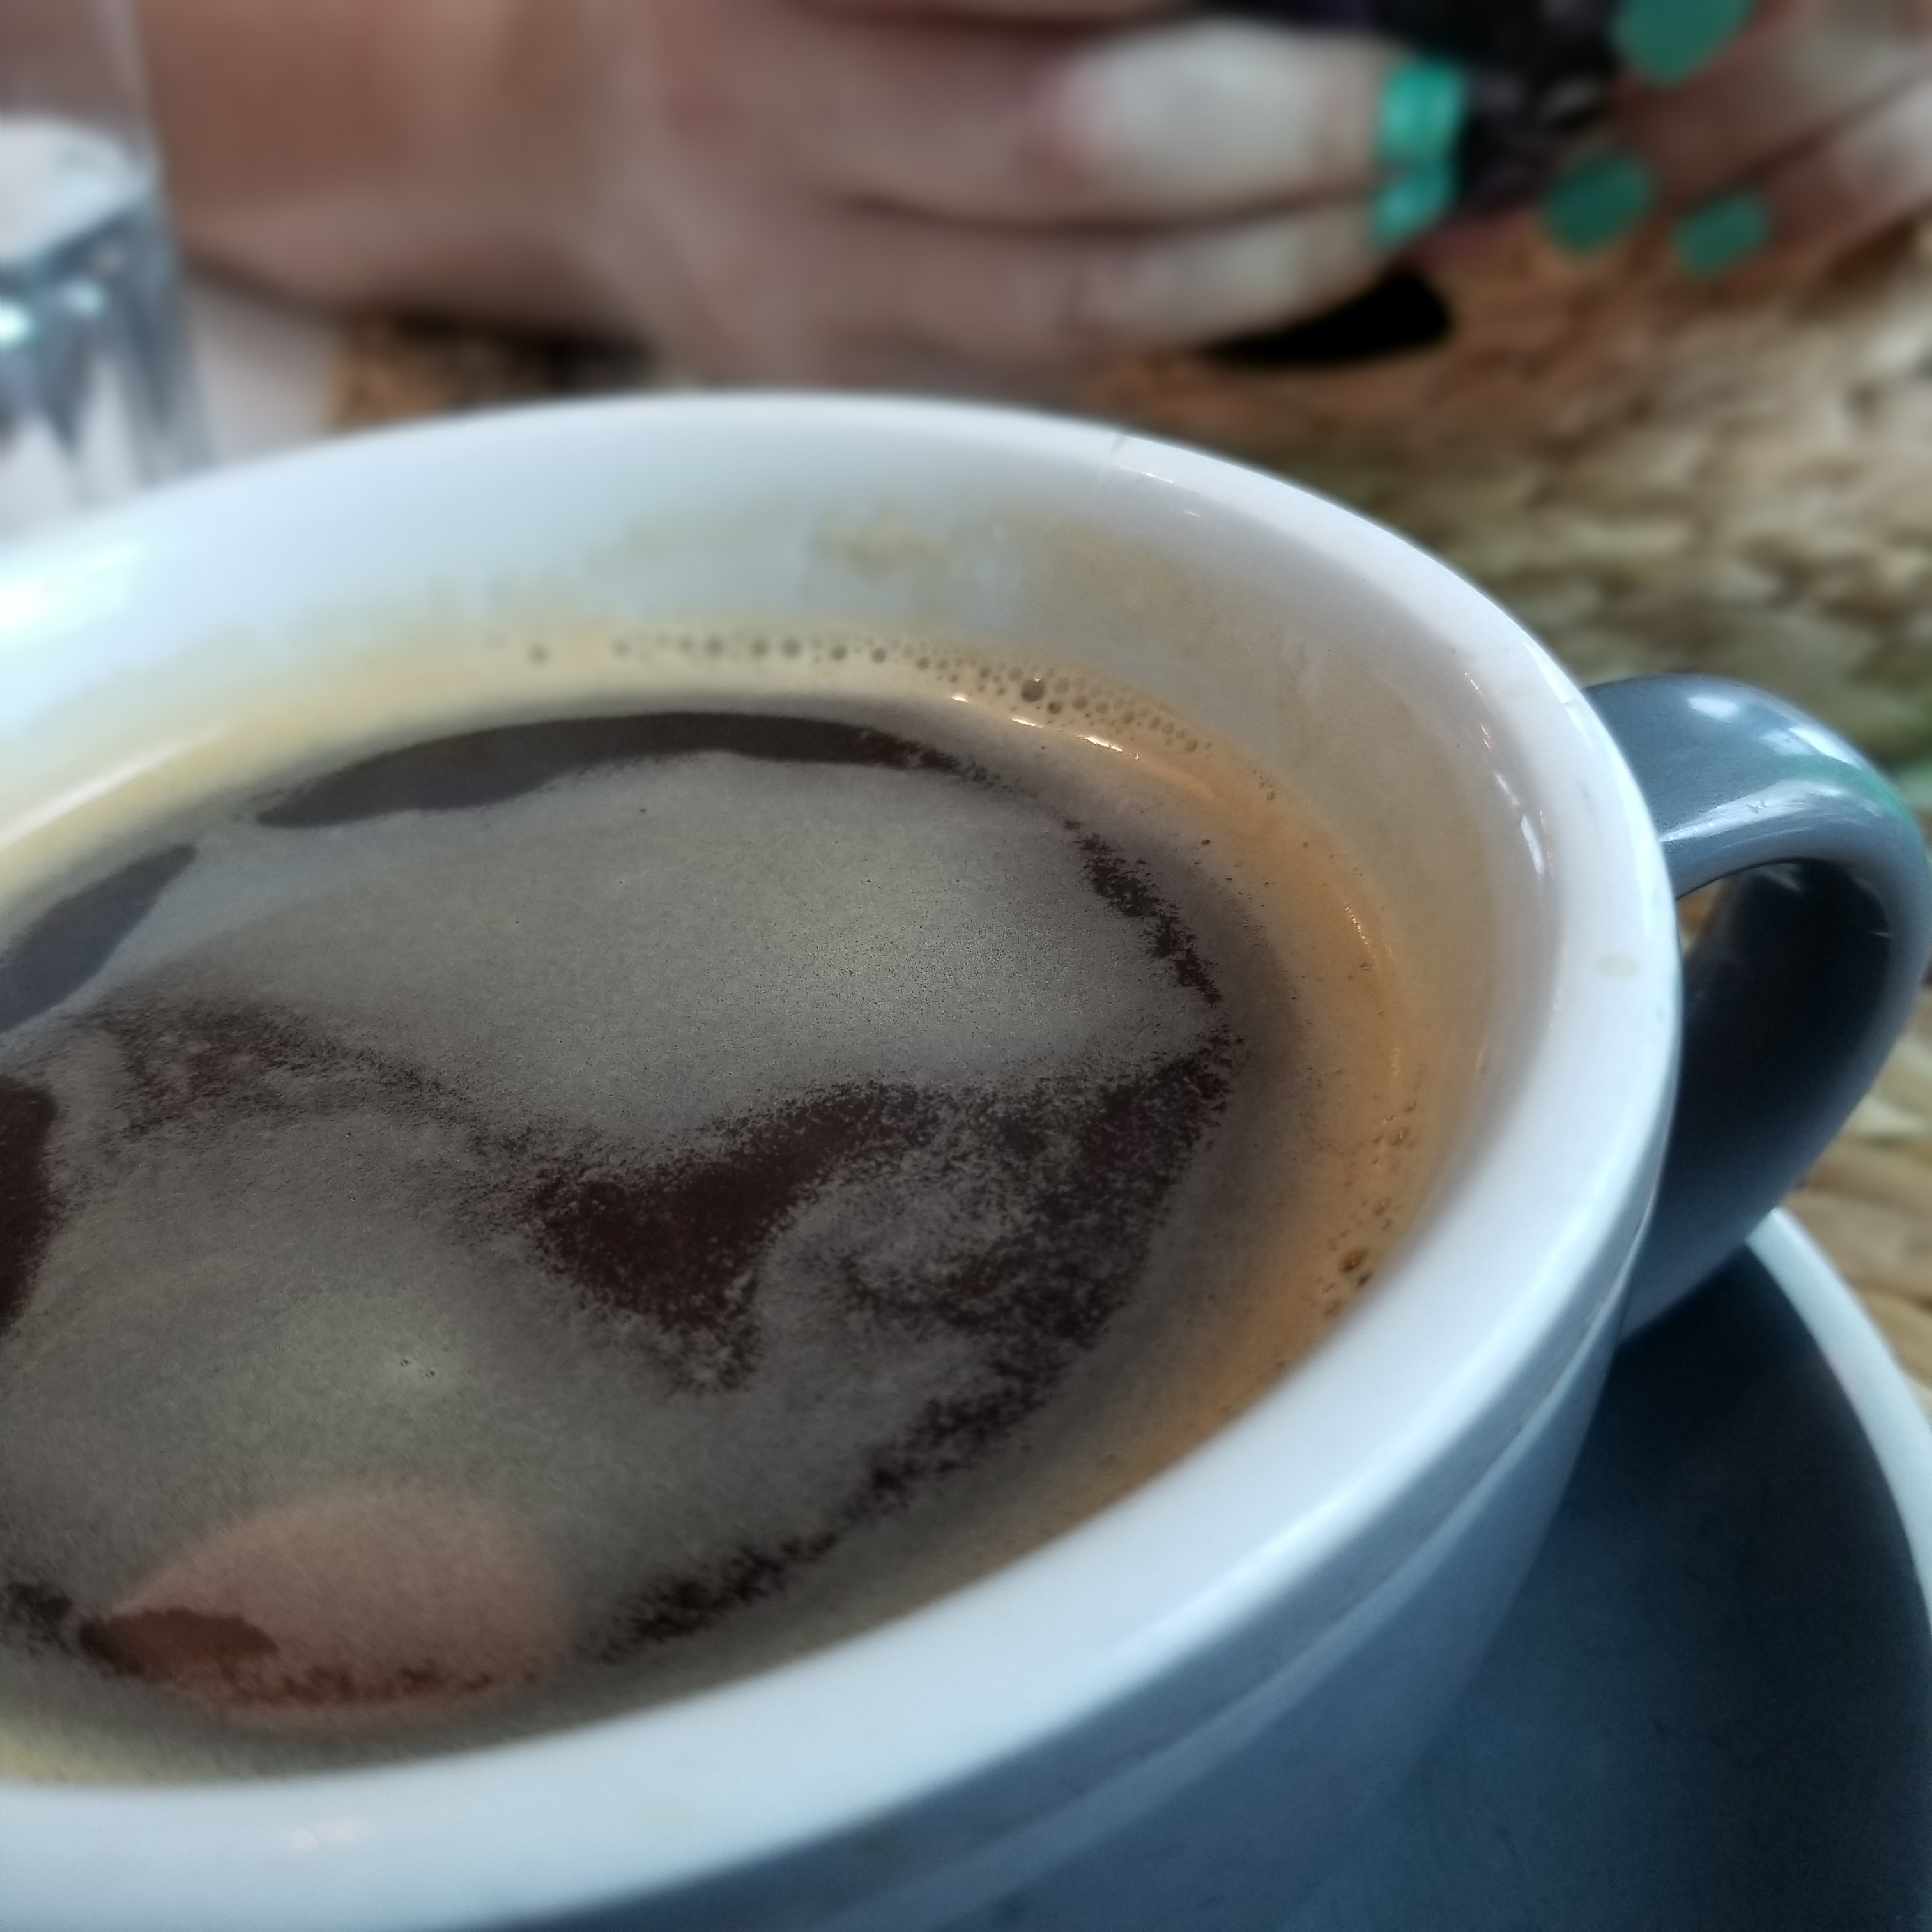 3 Reasons Why You Shouldn’t Make Coffee with Distilled Water